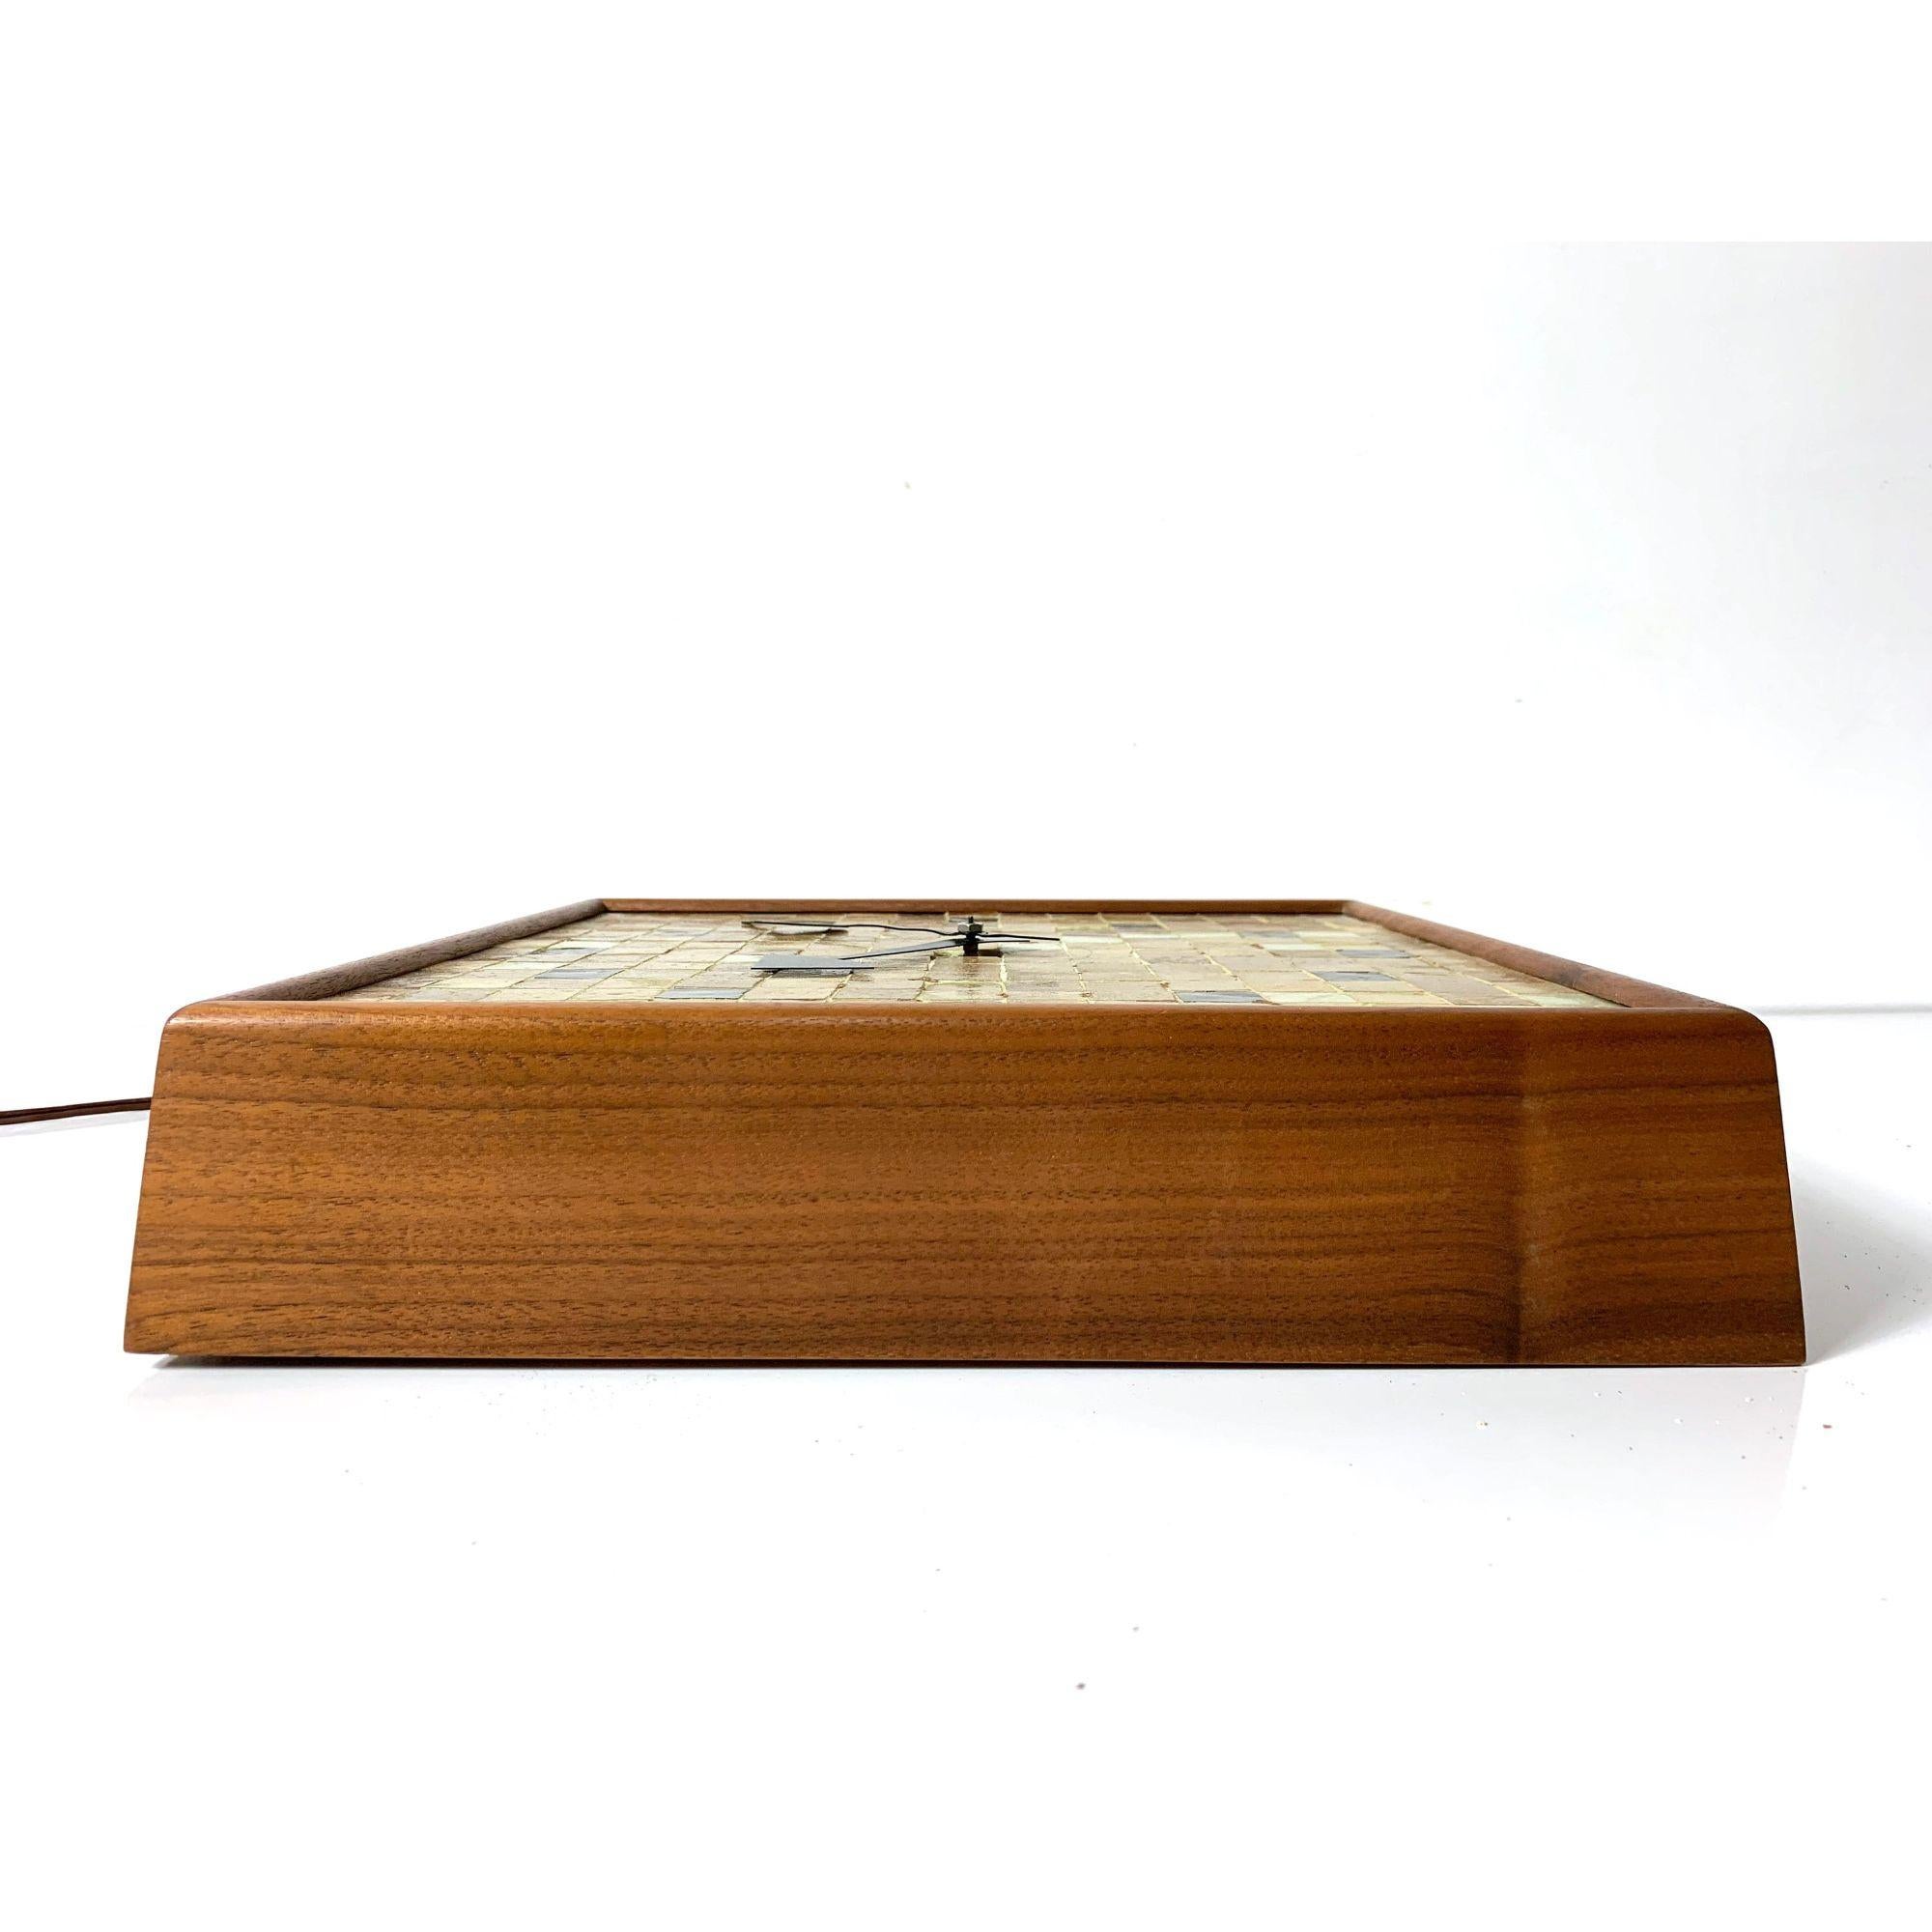 Rare Mosaic Tile Wall Clock in Walnut by George Nelson & Assoc circa 1950s For Sale 3